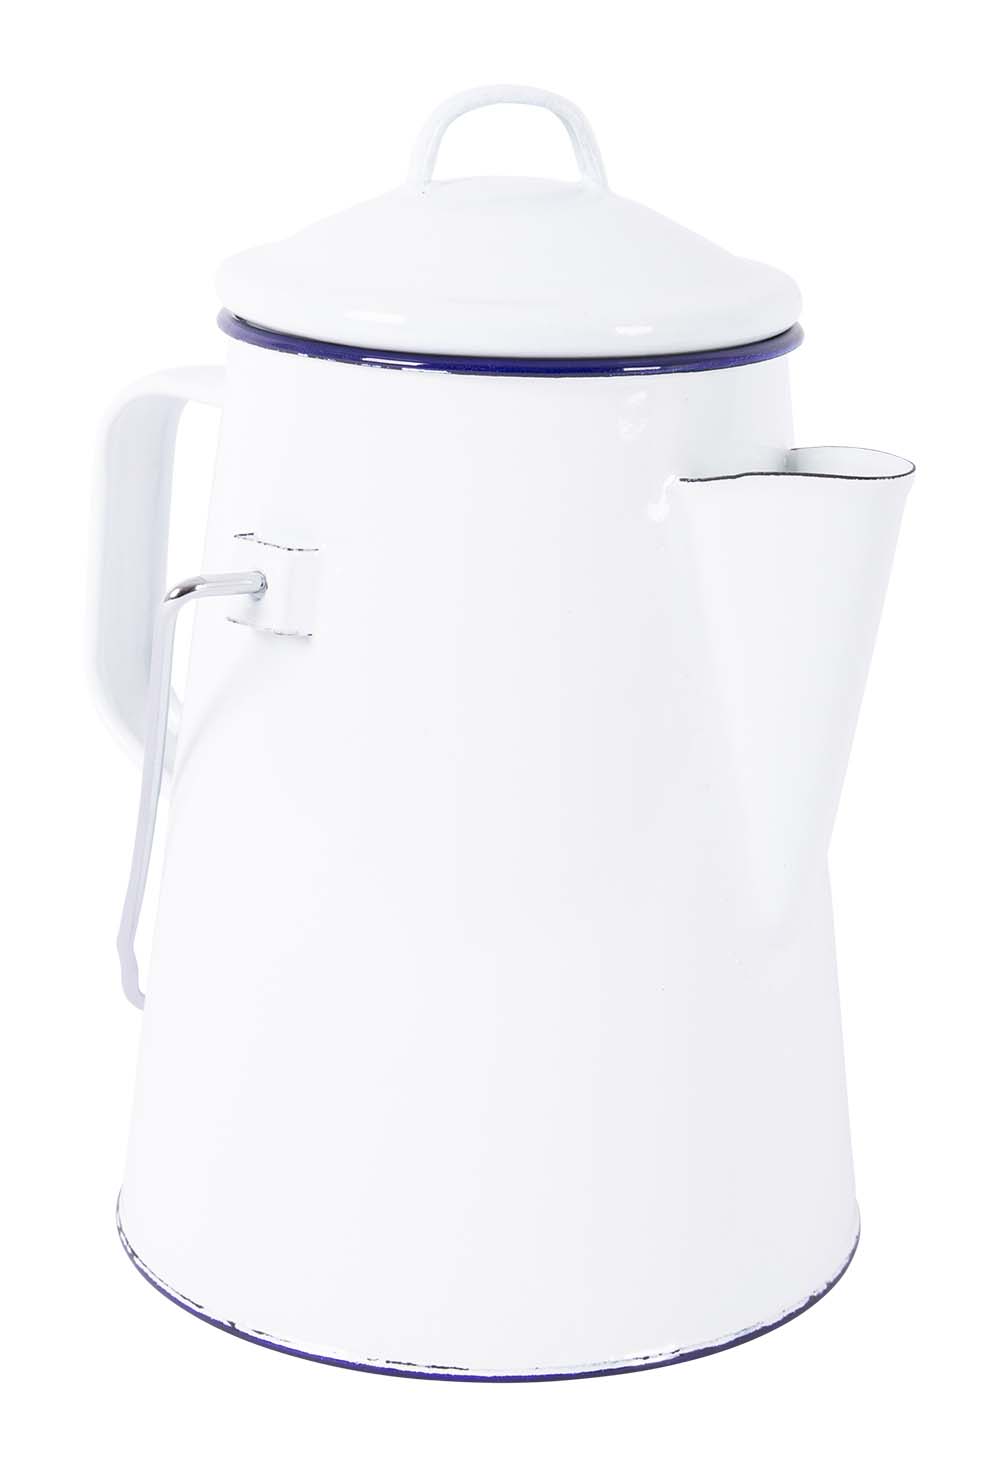 6101527 An enamelled tea kettle. This strong steel kettle has an enamel layer, this hard layer ensures extra hygiene and the sturdiness of the plate. Enamel is also inflammable and durable. The kettle is decorated with a blue edge.